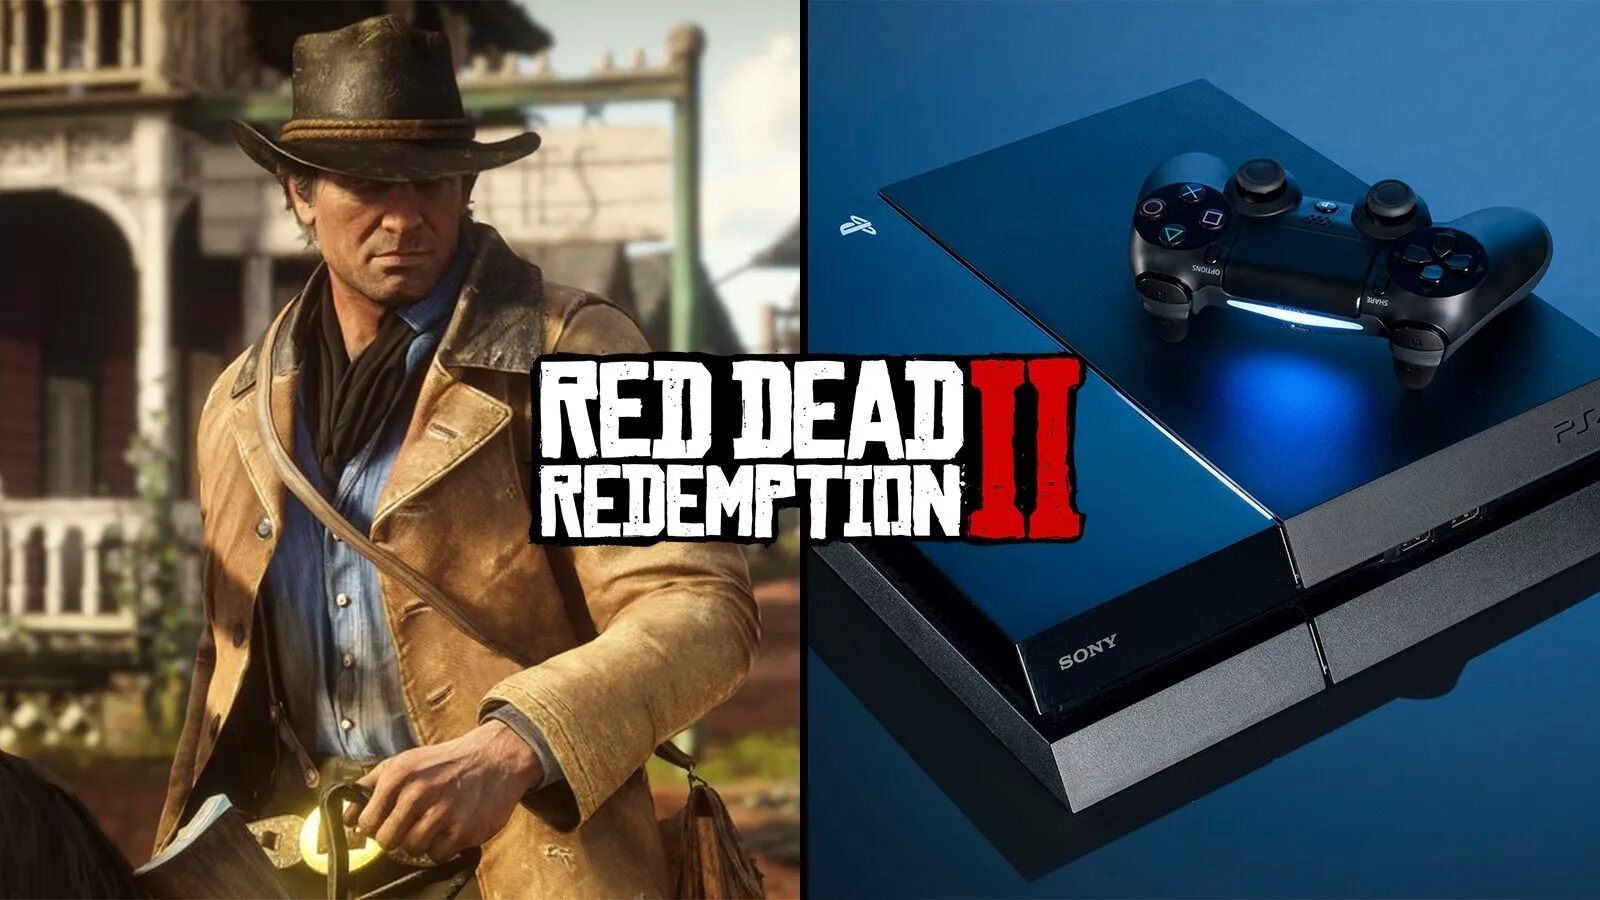 Rdr 2 ps4 диск. Red Dead 2 ps4. Red Dead Redemption 2 диск пс4. Sony PLAYSTATION 4 Slim Red Dead Redemption 2. Red redemption 1 ps4